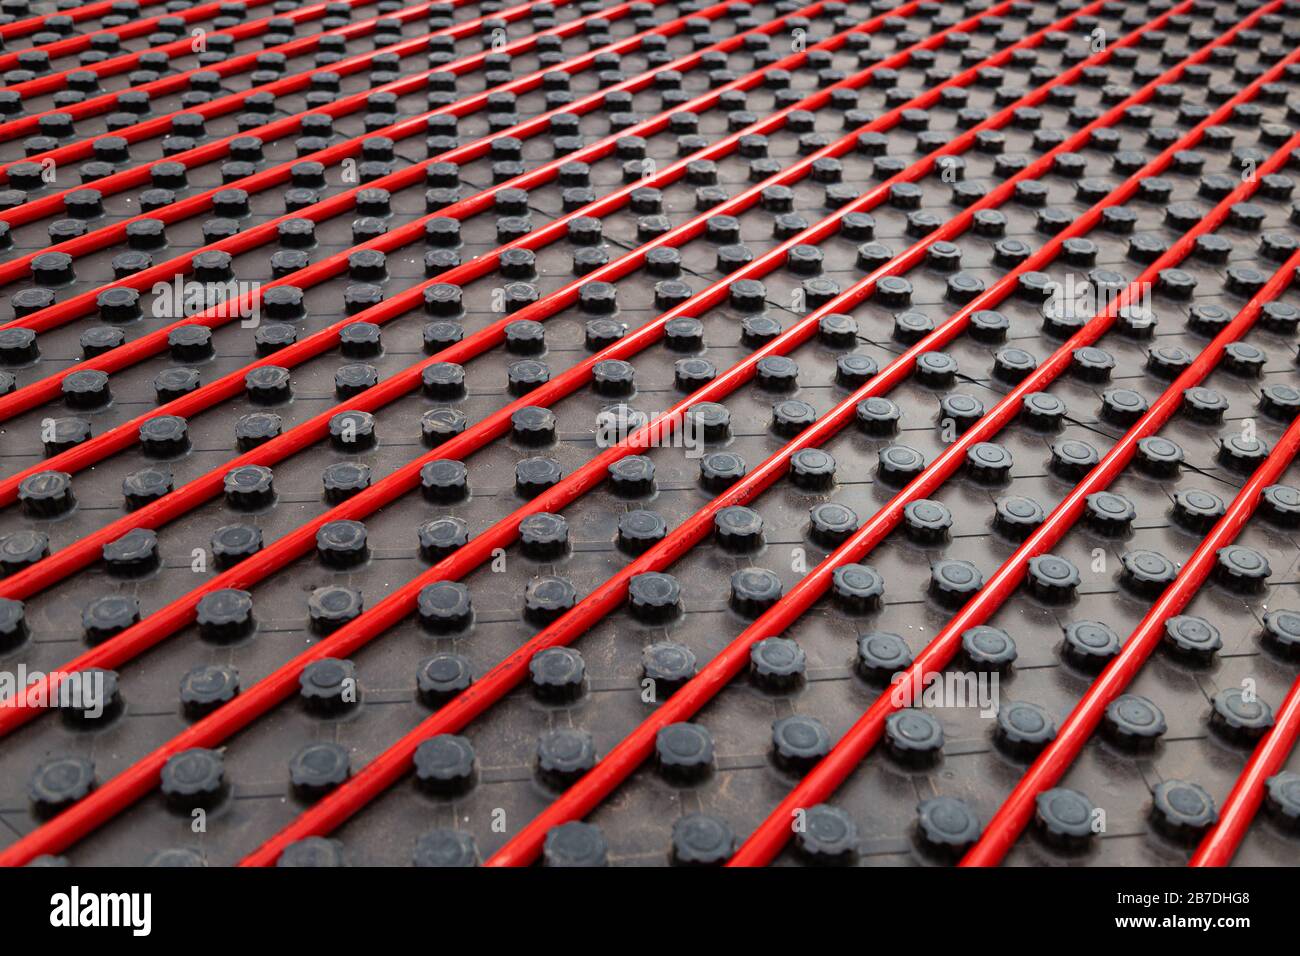 Radiant underfloor heating installation with red flexible tubing mounted on black insulation boards Stock Photo